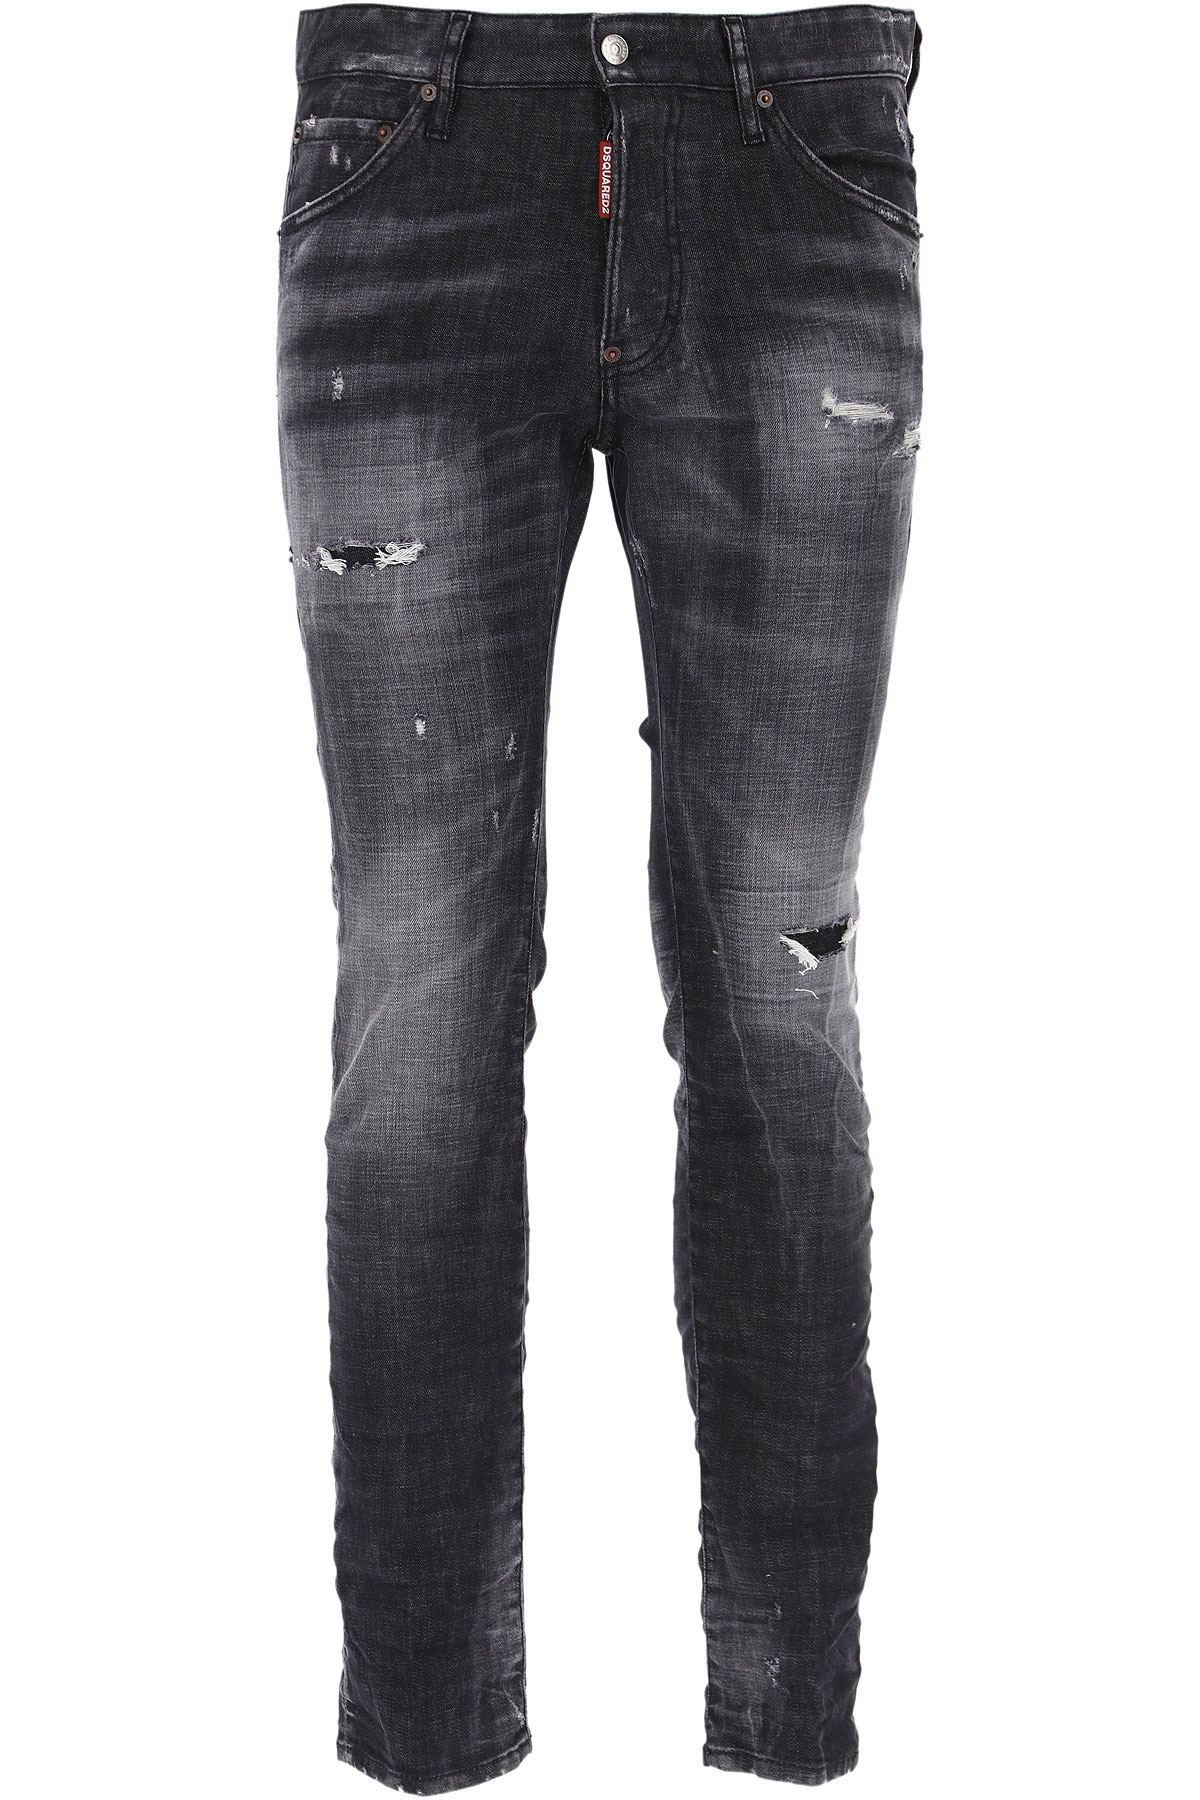 Mens Clothing Dsquared2, Style code: s74lb0797-s30357-900